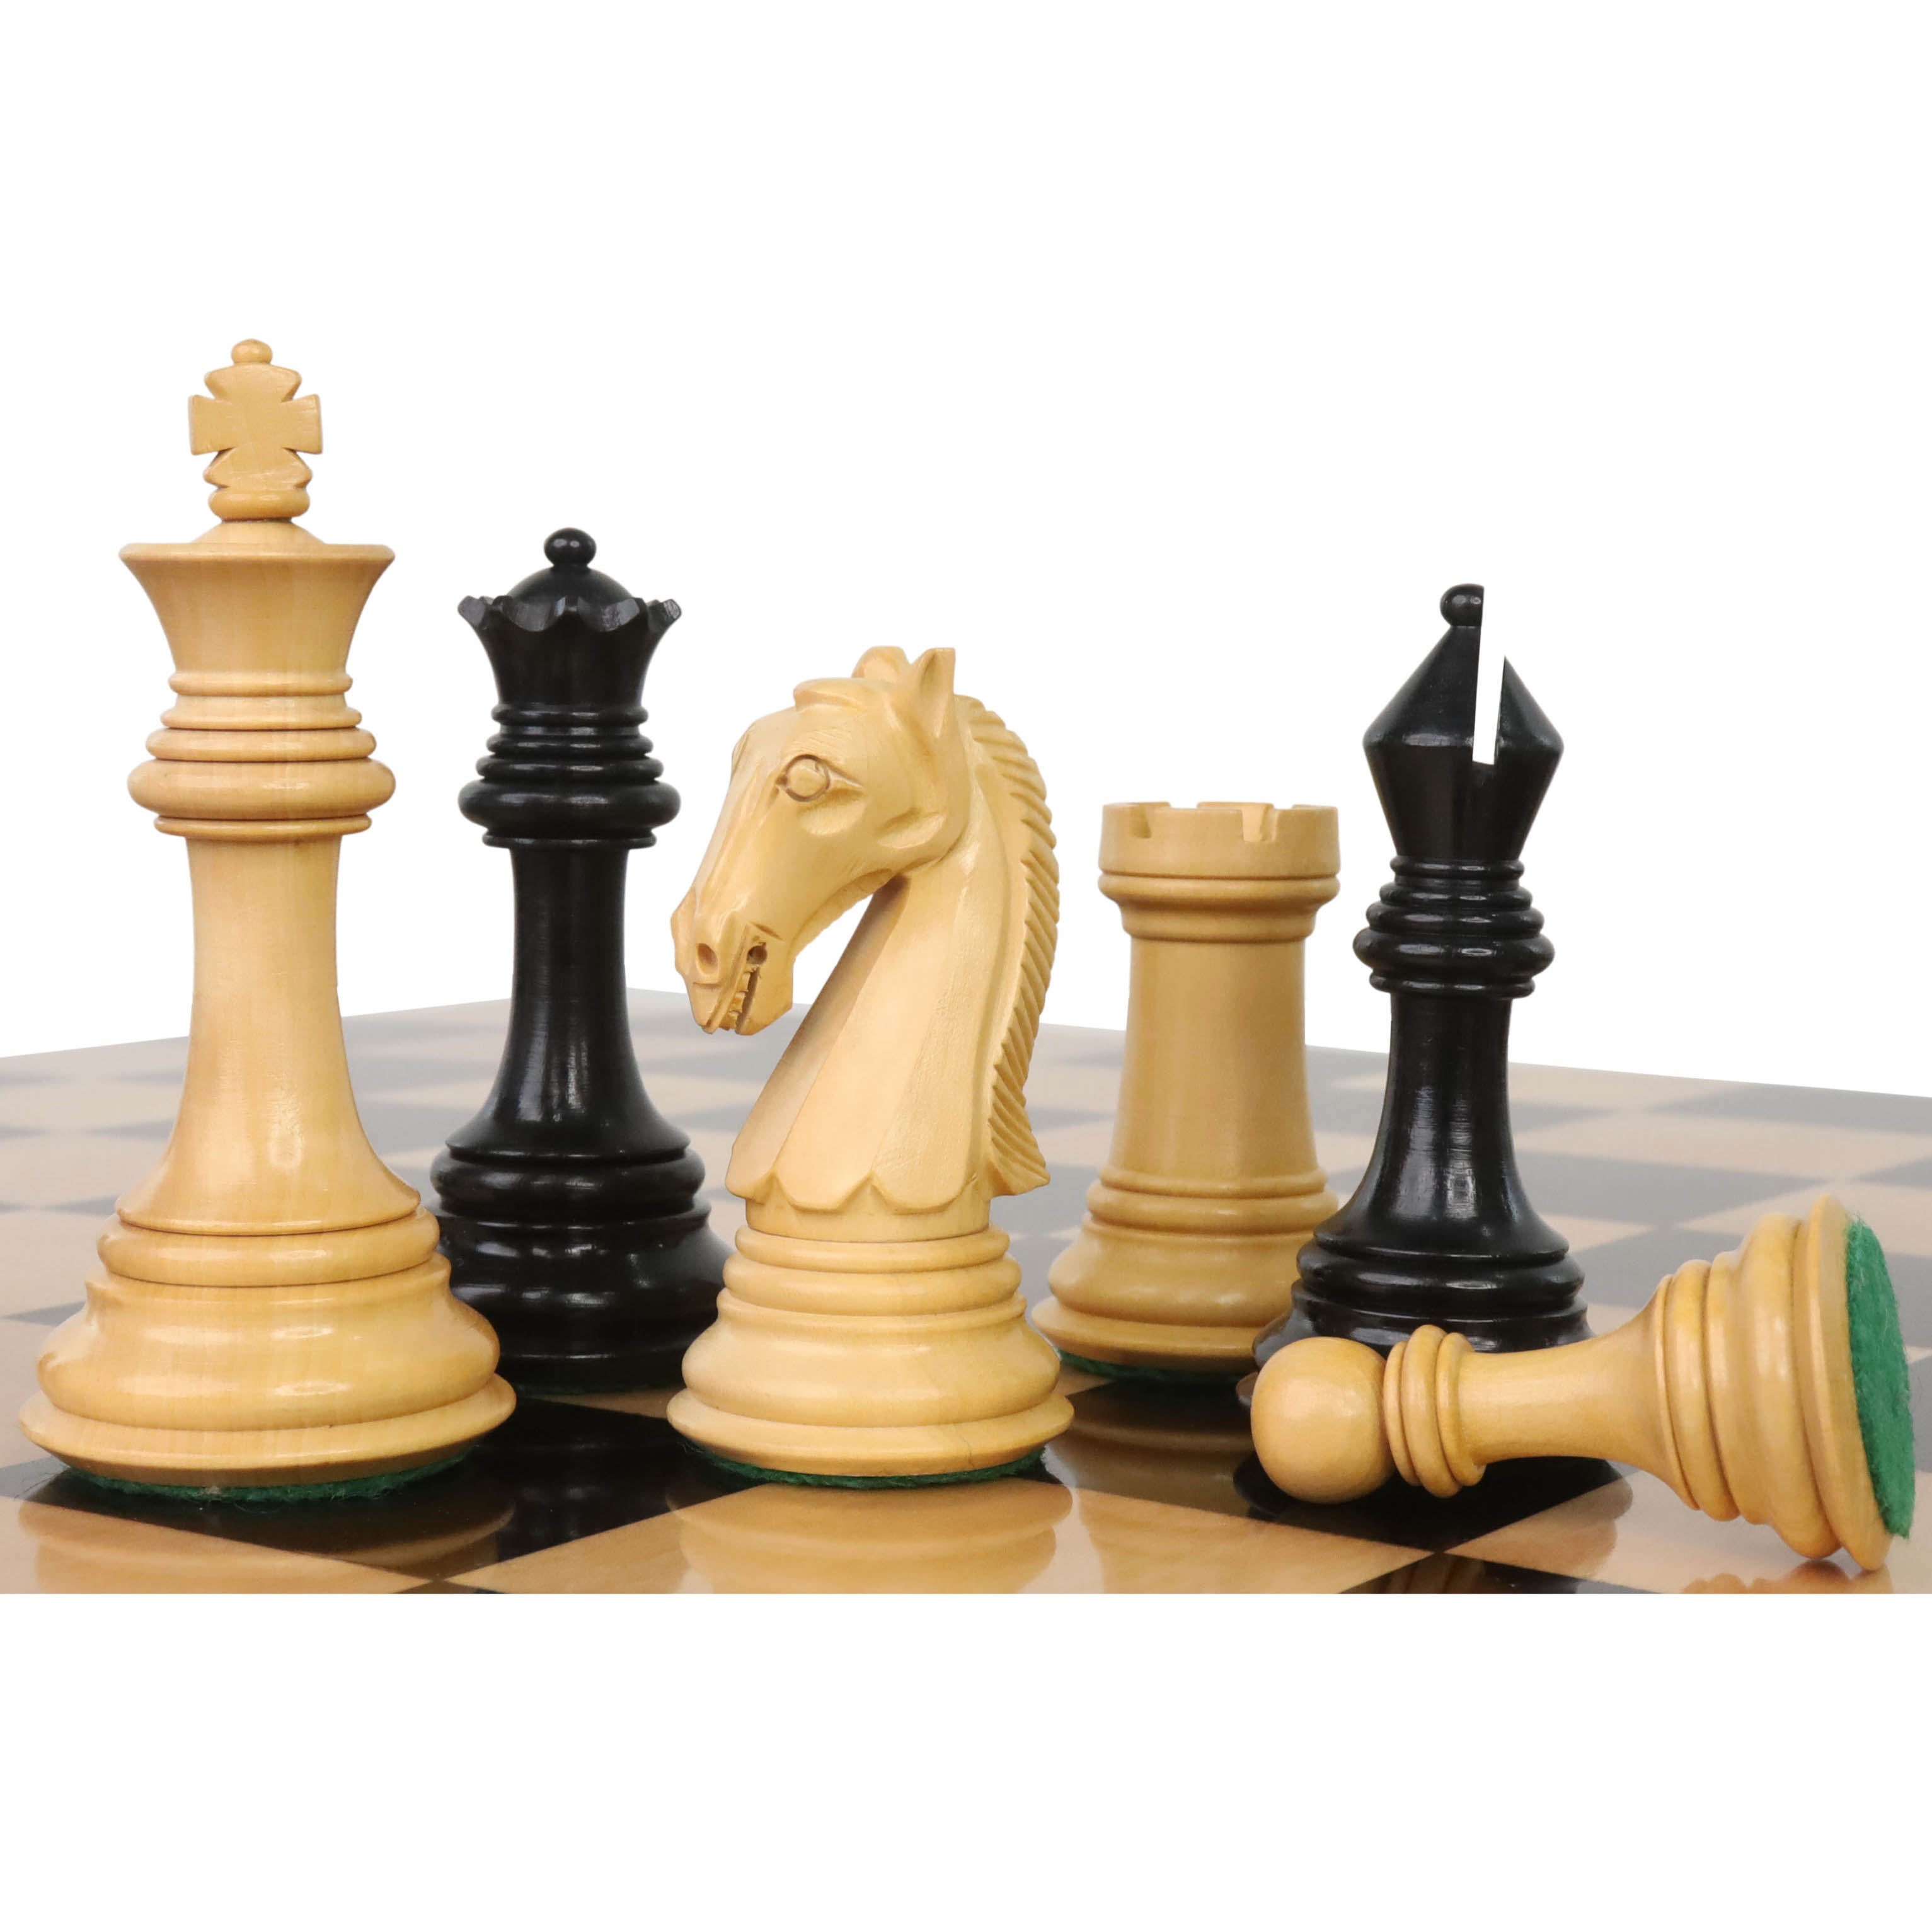 3.9" New Columbian Staunton Chess Pieces Only Set - Ebony Wood - Double Weighted